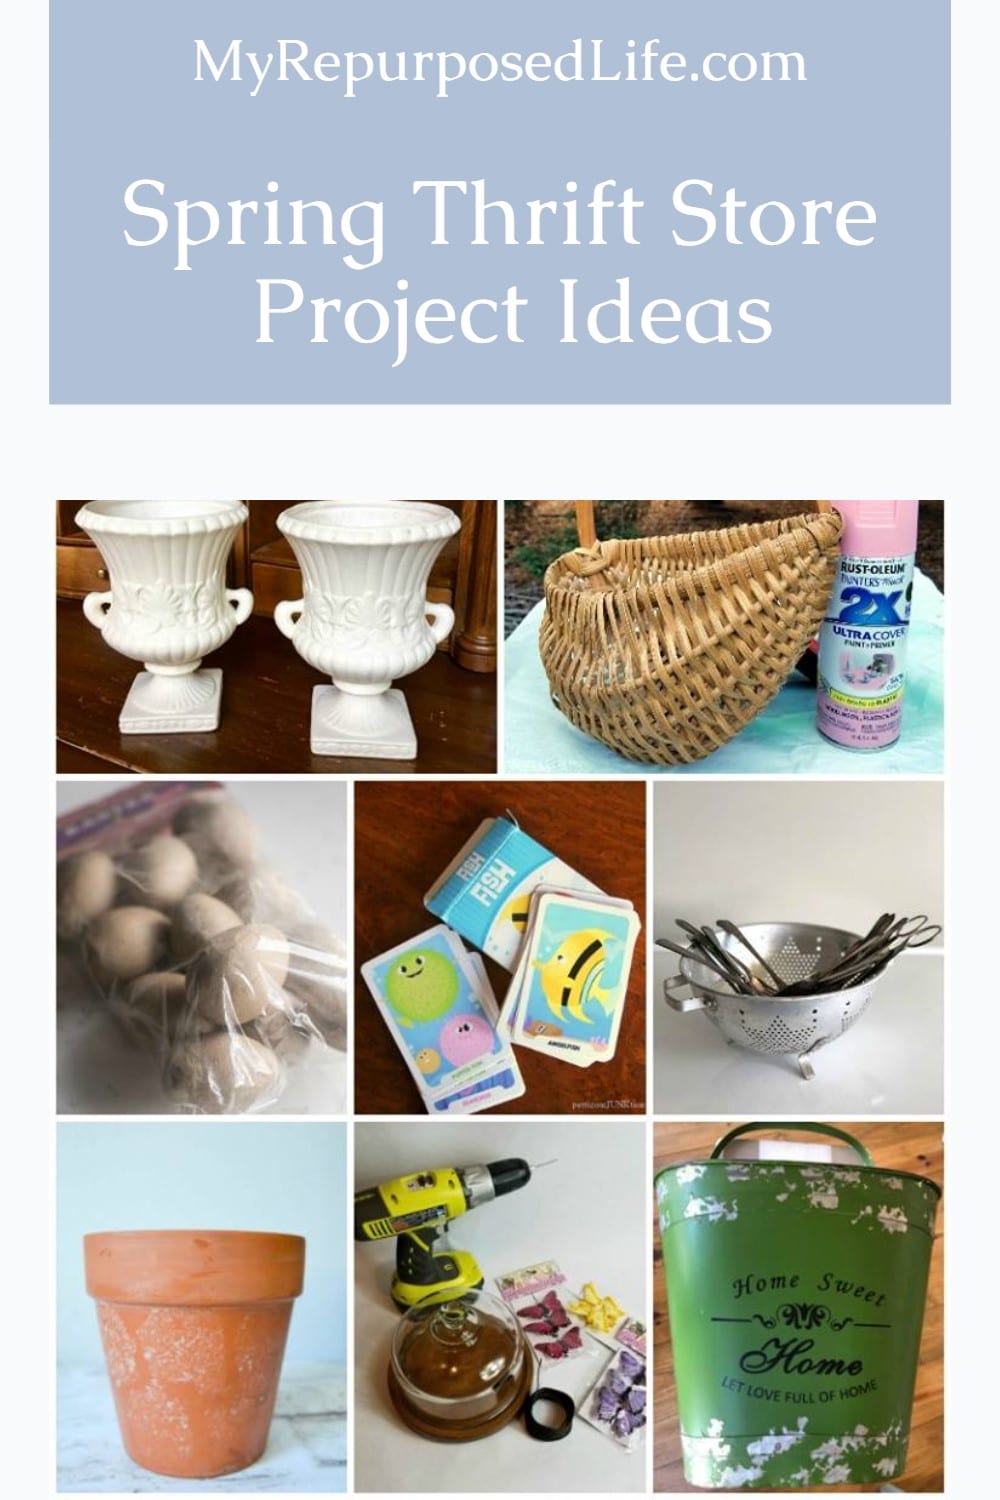 Spring Project ideas using thrift store items! Maybe you have some of these items at home already. Easy outdoor projects. Easy Home Decor projects to DIY. #MyRepurposedLife via @repurposedlife